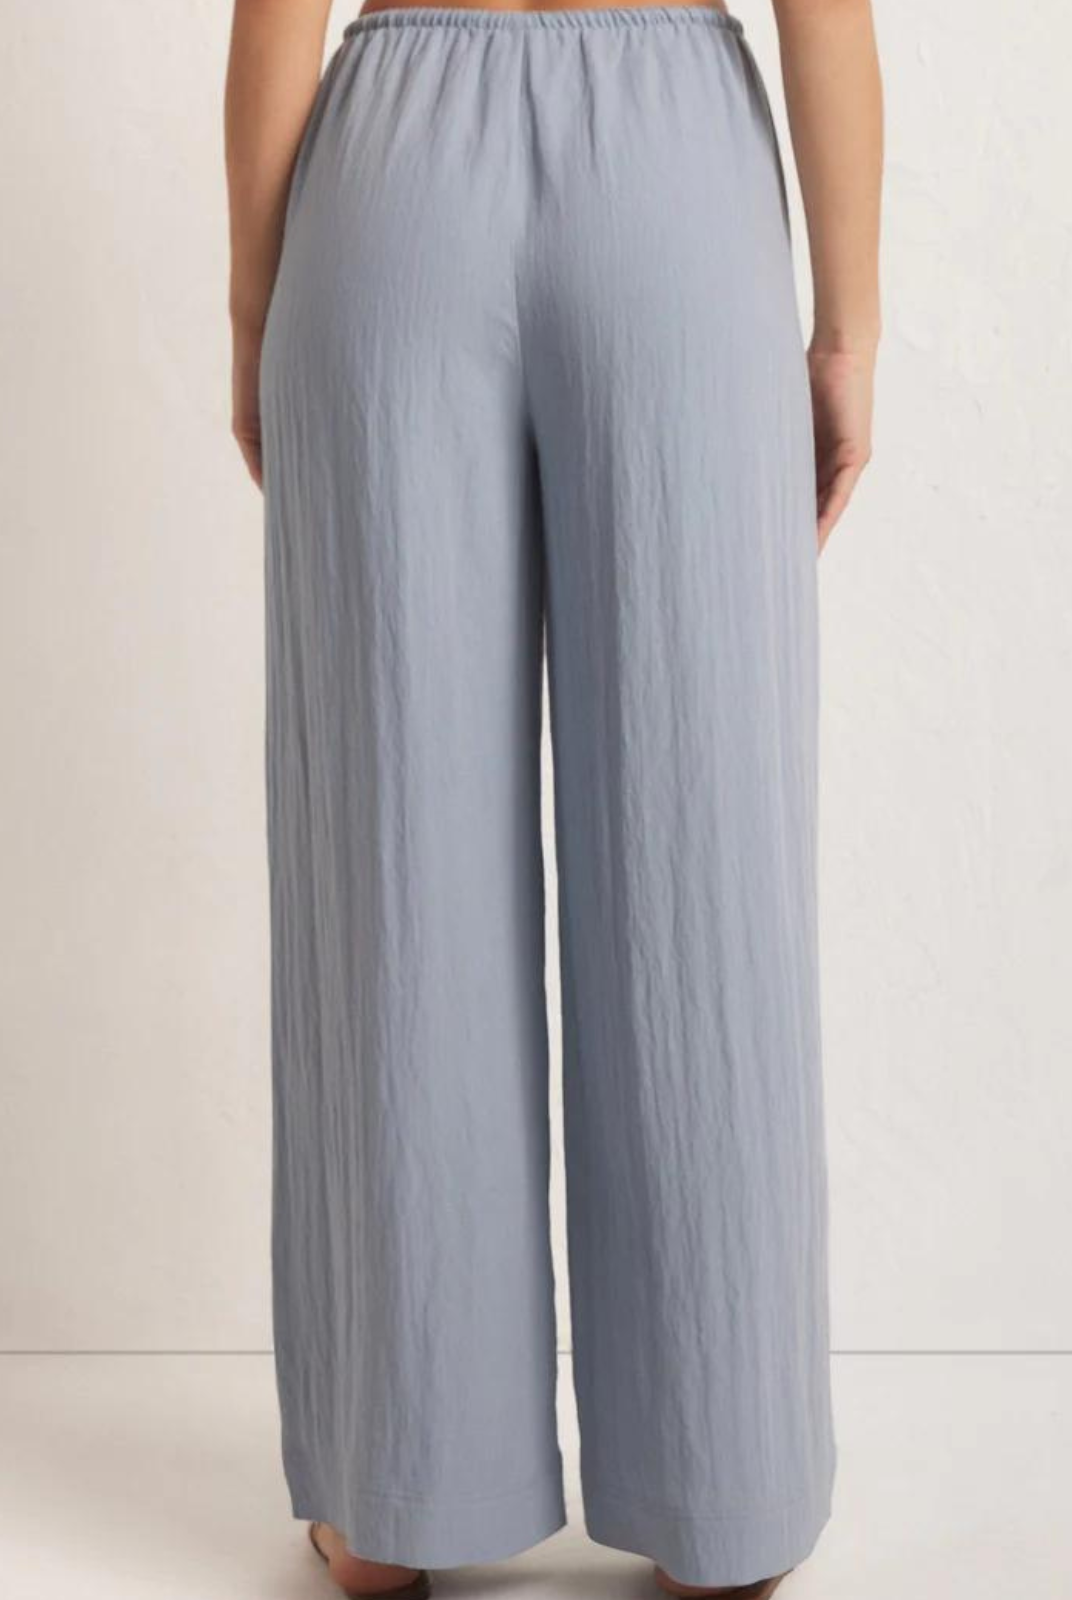 Z Supply Soleil Pant When you want lounge level comfort without sacrificing style, you'll want the Soleil Pant. Featuring an easy, pull-on design, this breezy wide leg pant can be styled up or down effortlessly.